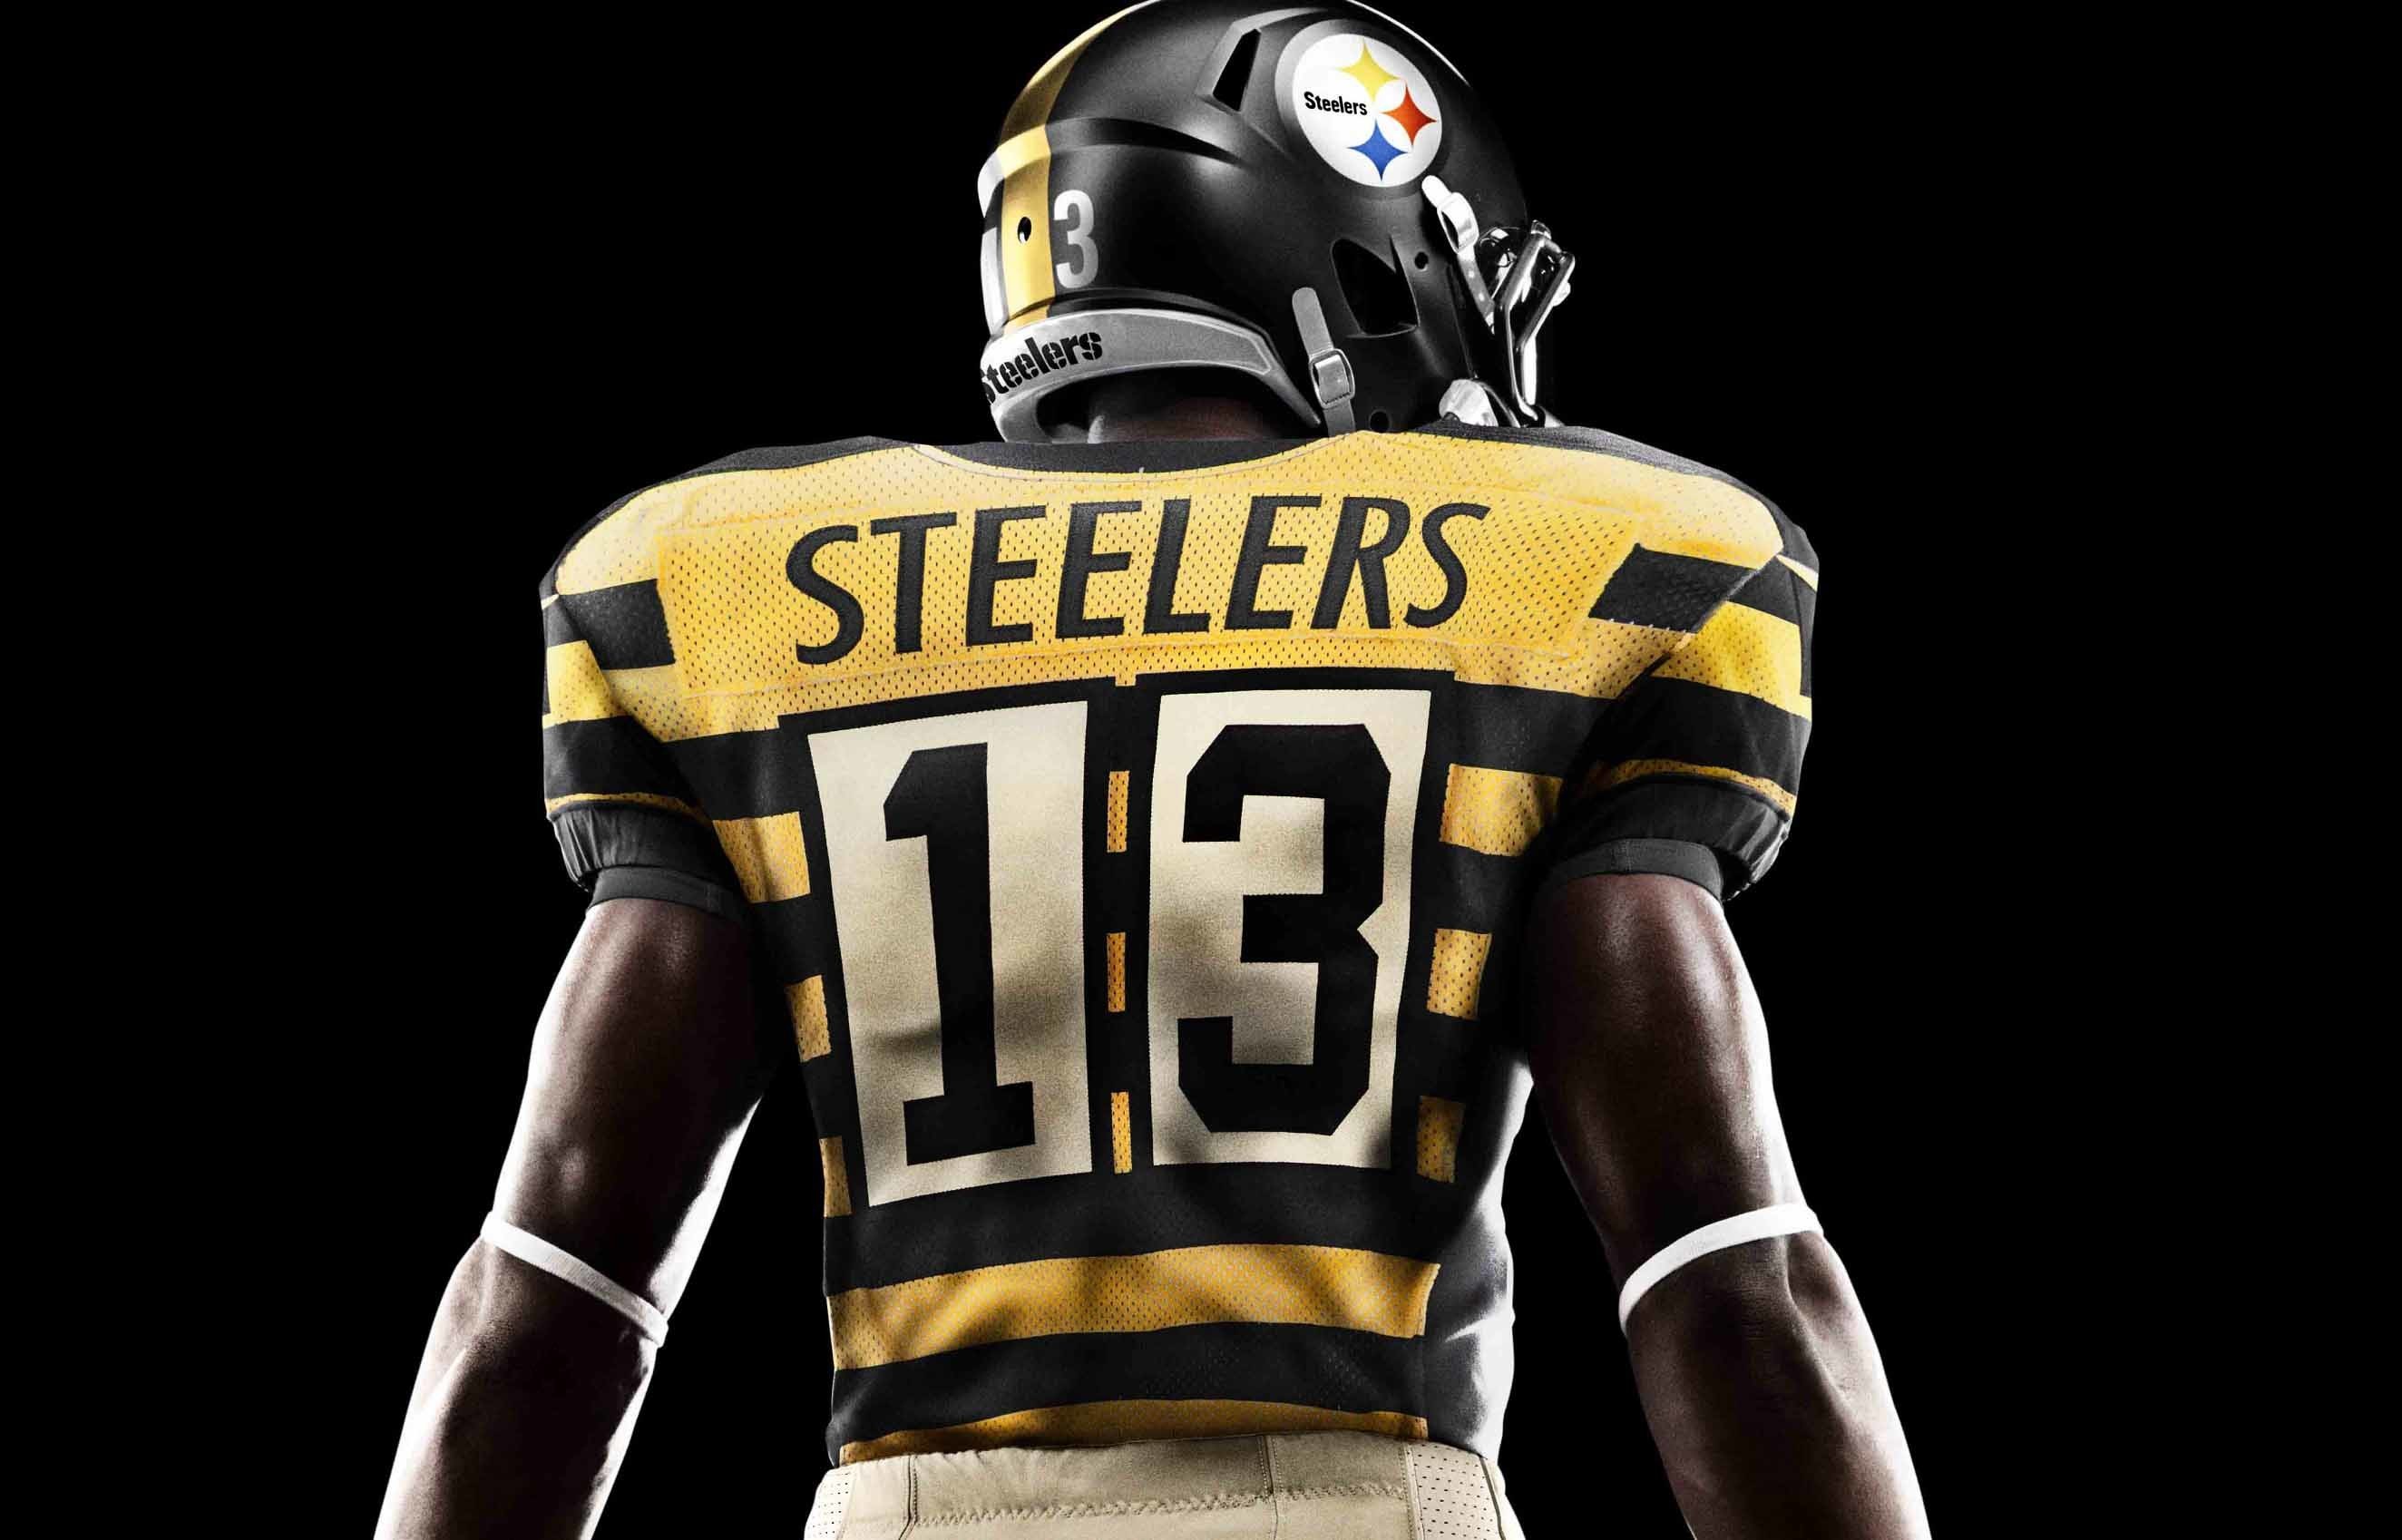 2648x1698  Pittsburgh Steelers Wallpapers PC iPhone Android Â· Download Â· Nfl  ...